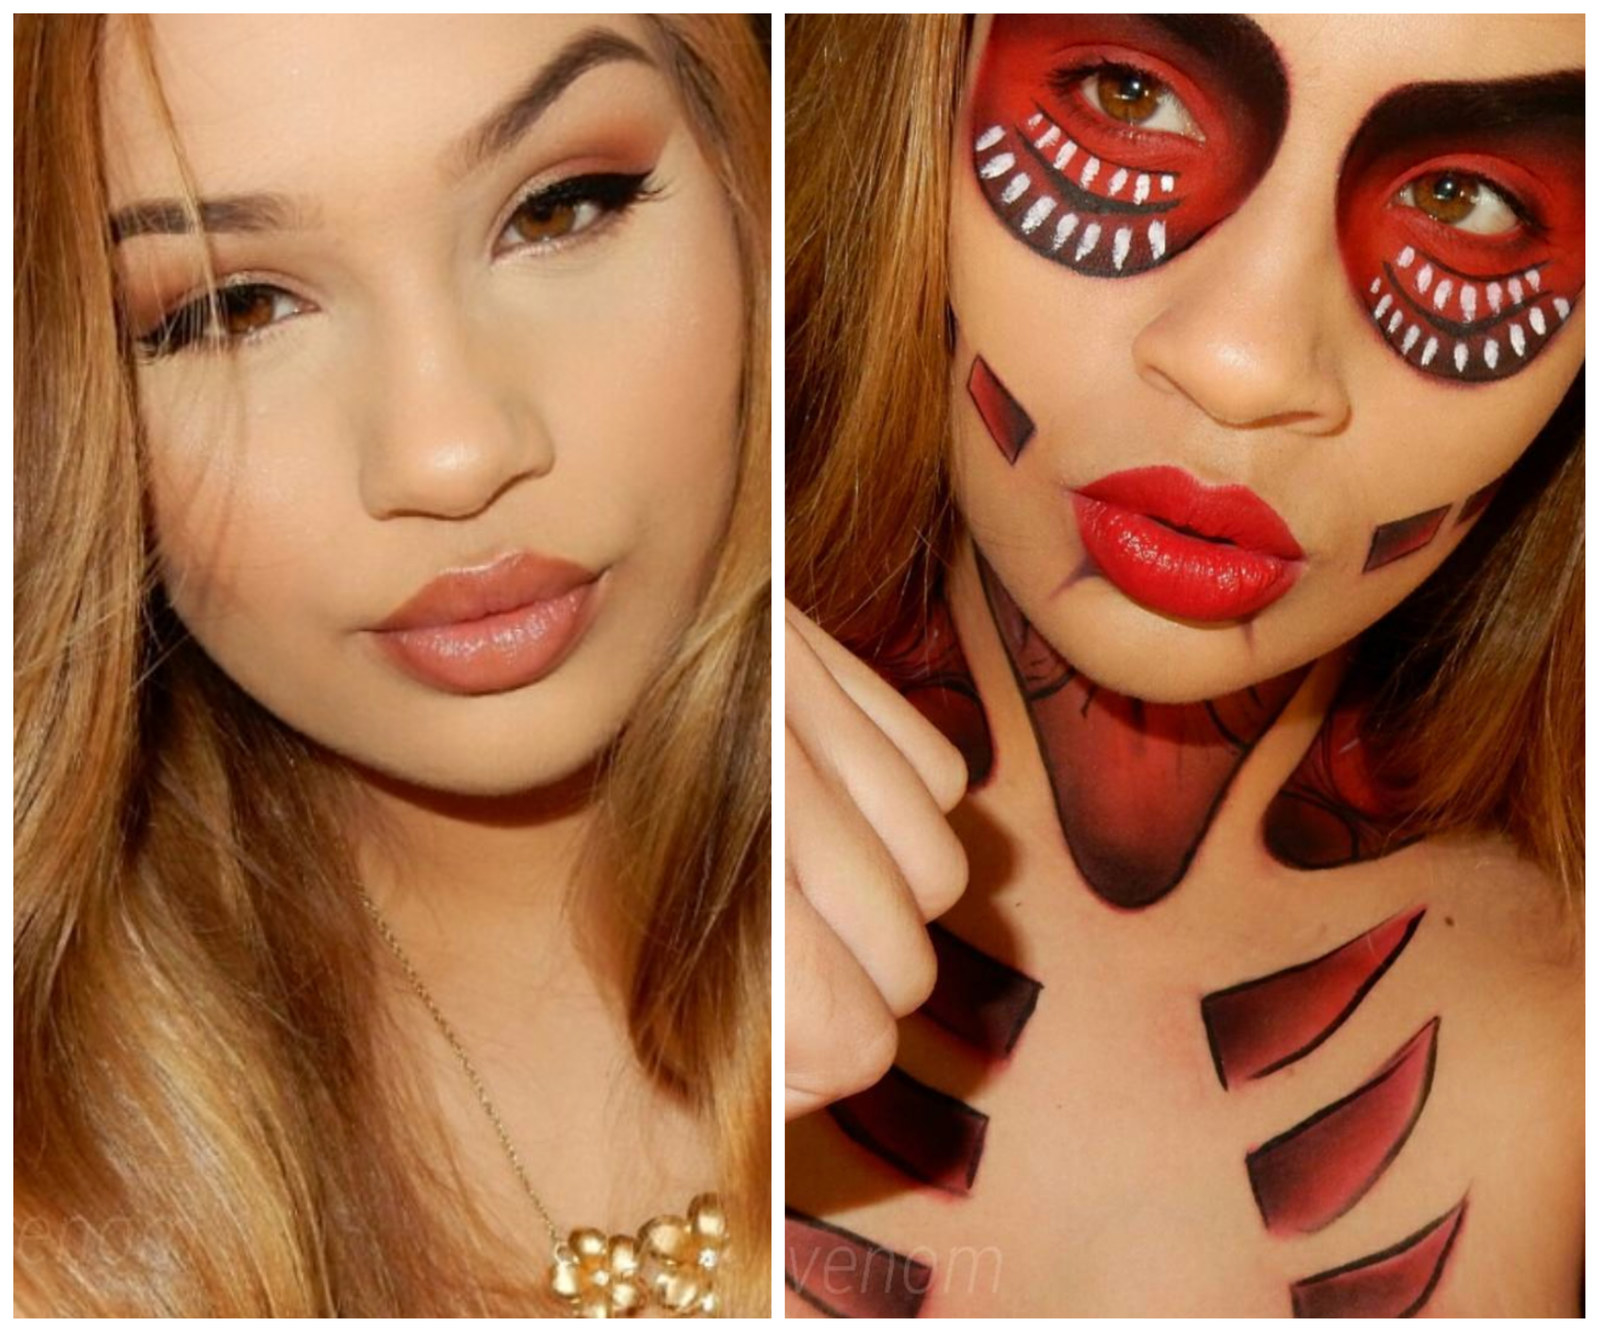 17 Halloween Makeup Before-And-Afters That'll Make You Say 